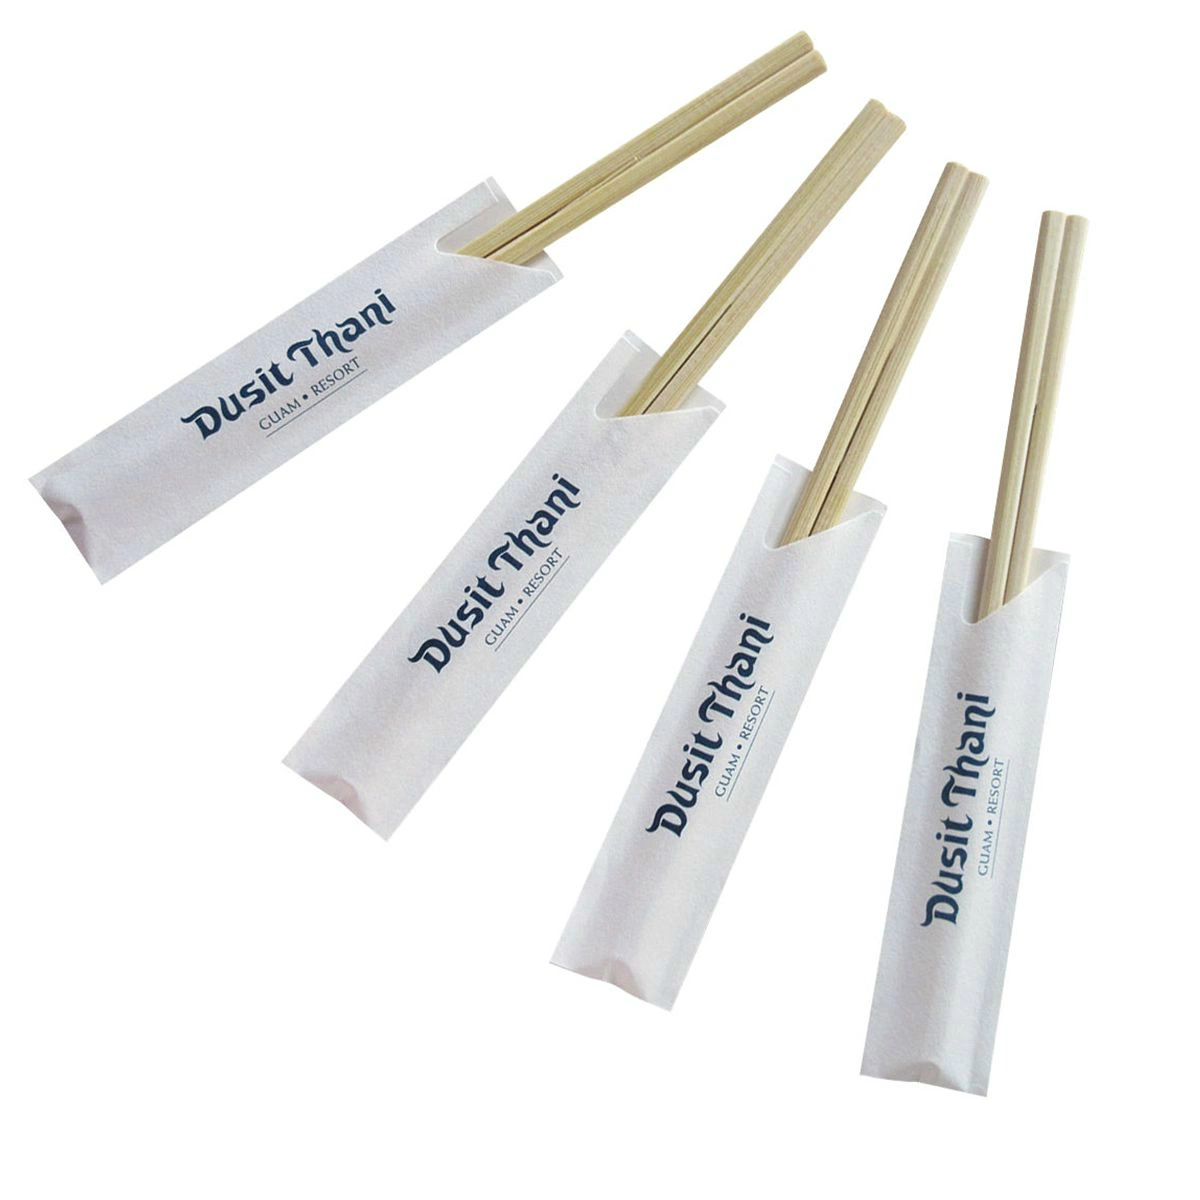 100% Natural Best Selling Chopsticks Disposable Bamboo